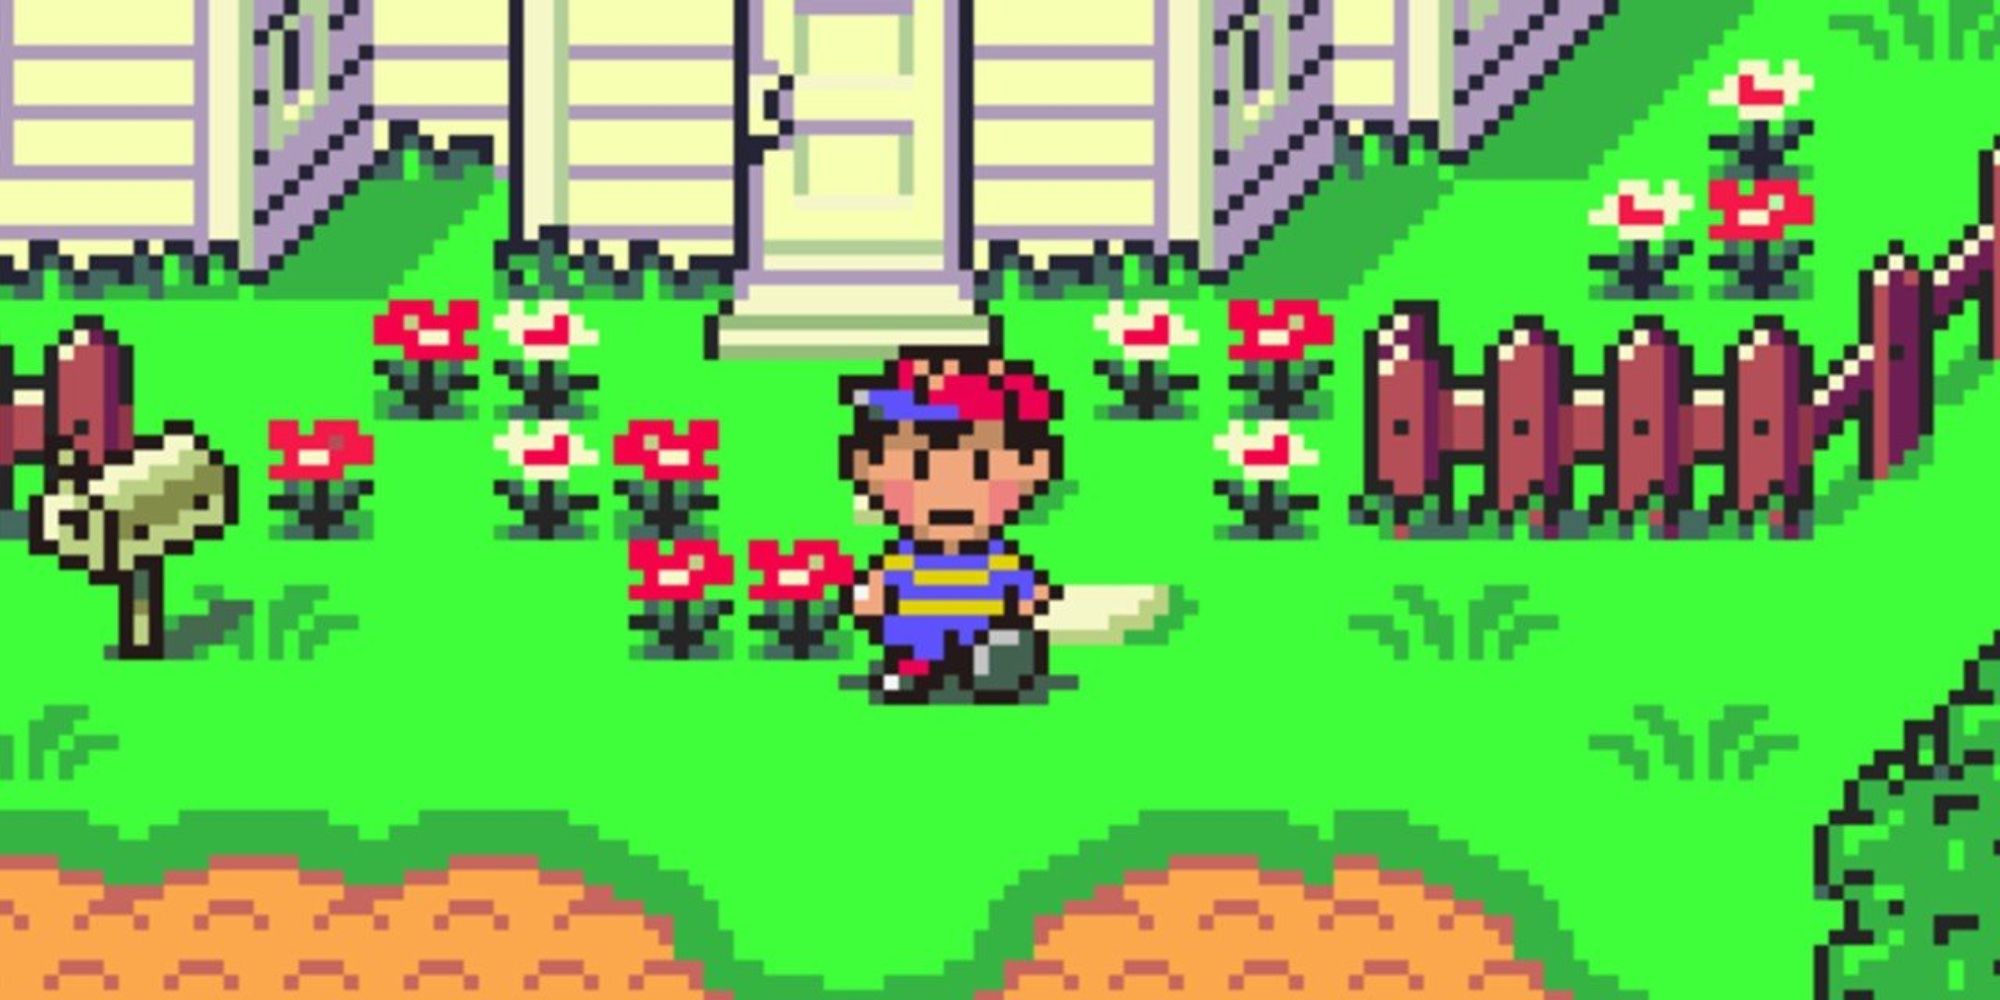 Standing in front of a house surrounded by flowers, ness stuck in the ground